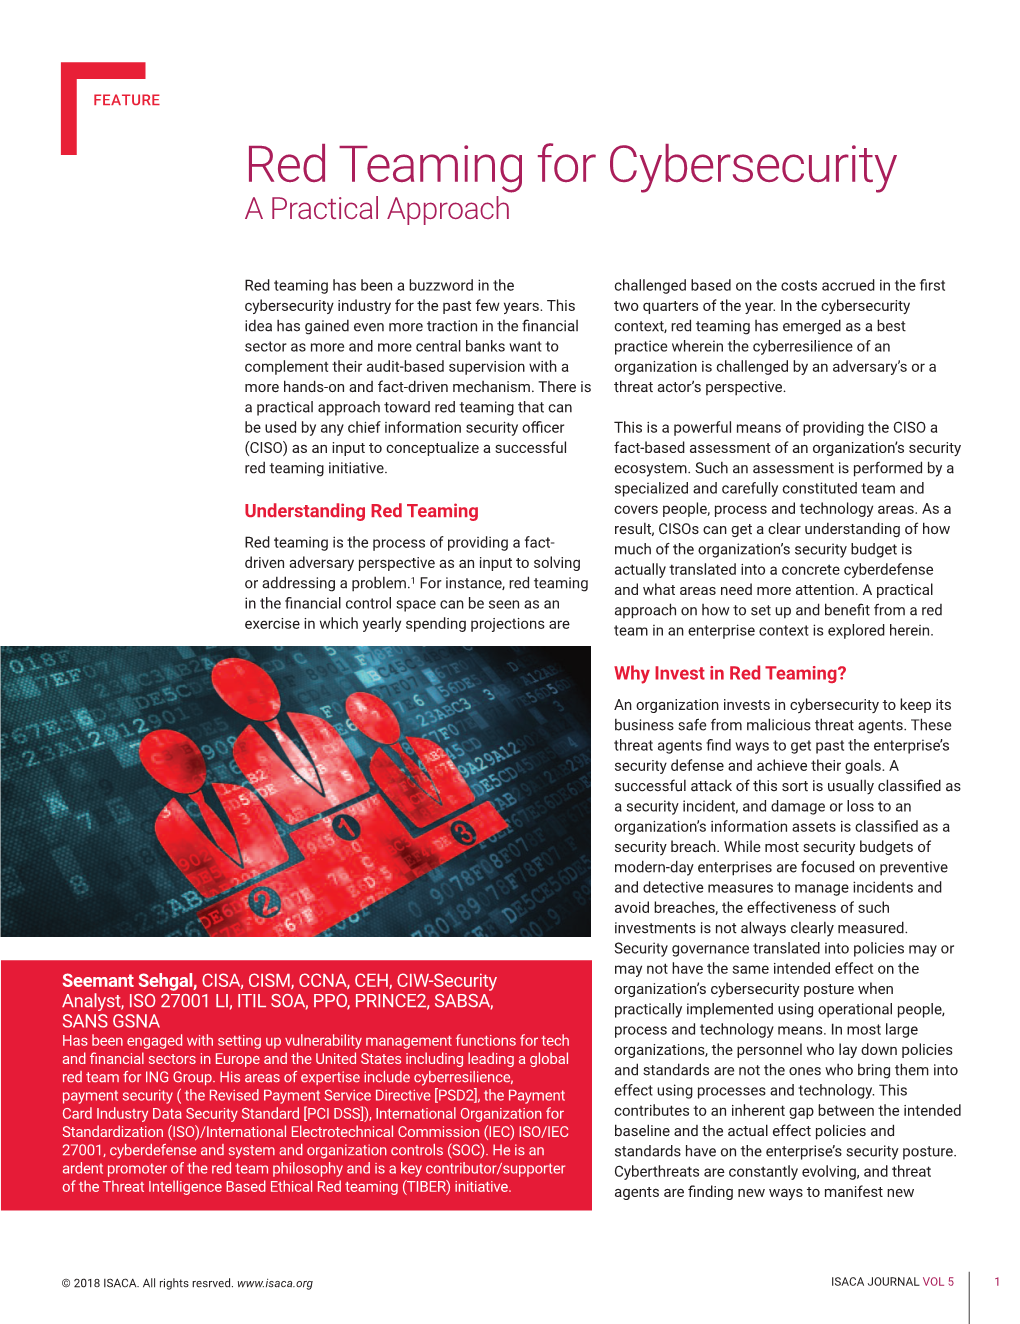 Red Teaming for Cybersecurity a Practical Approach